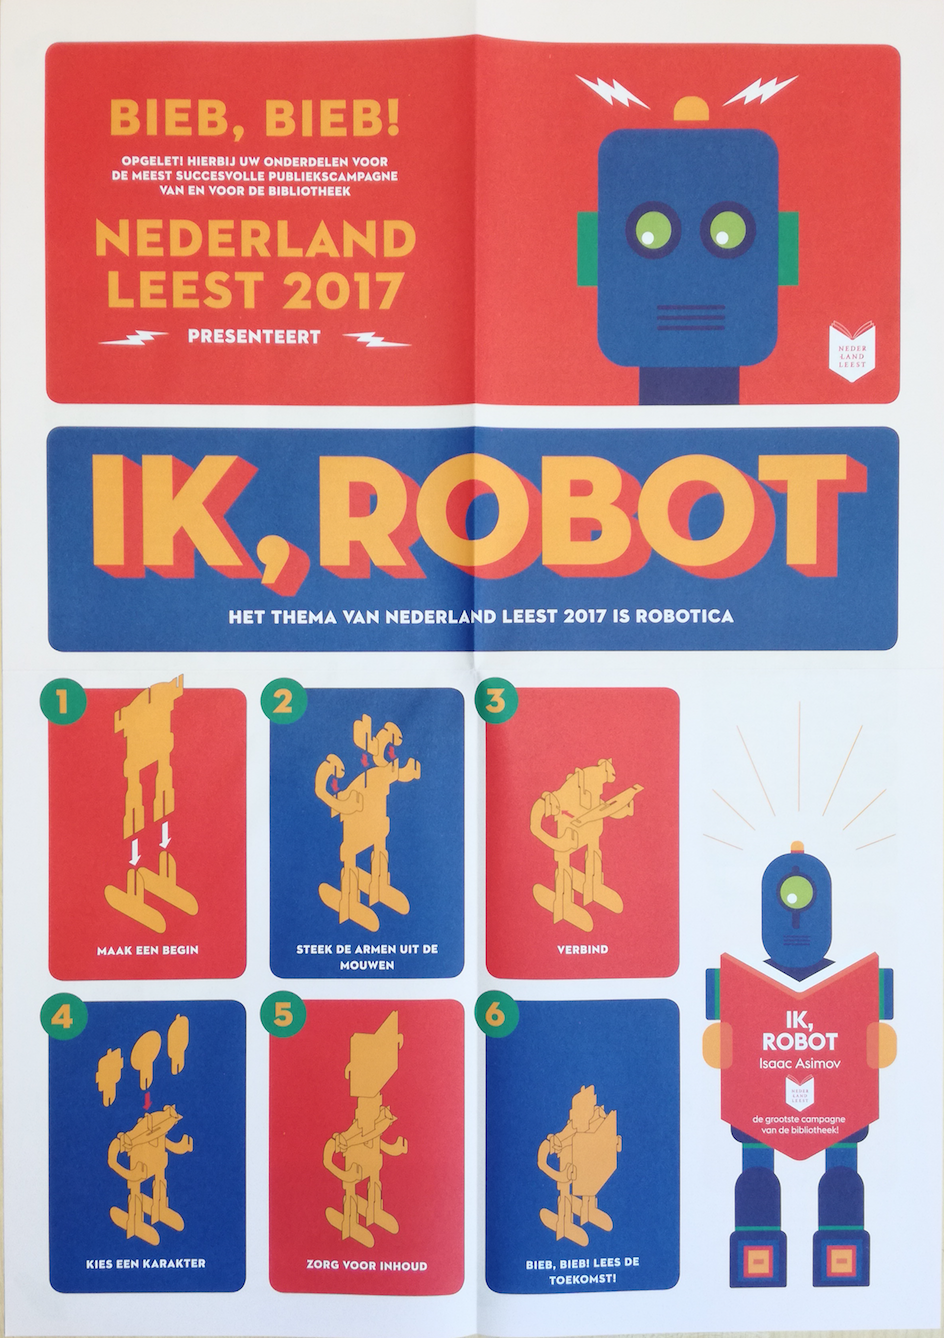 Poster for the bookweek, including a cut-out cardboard robot